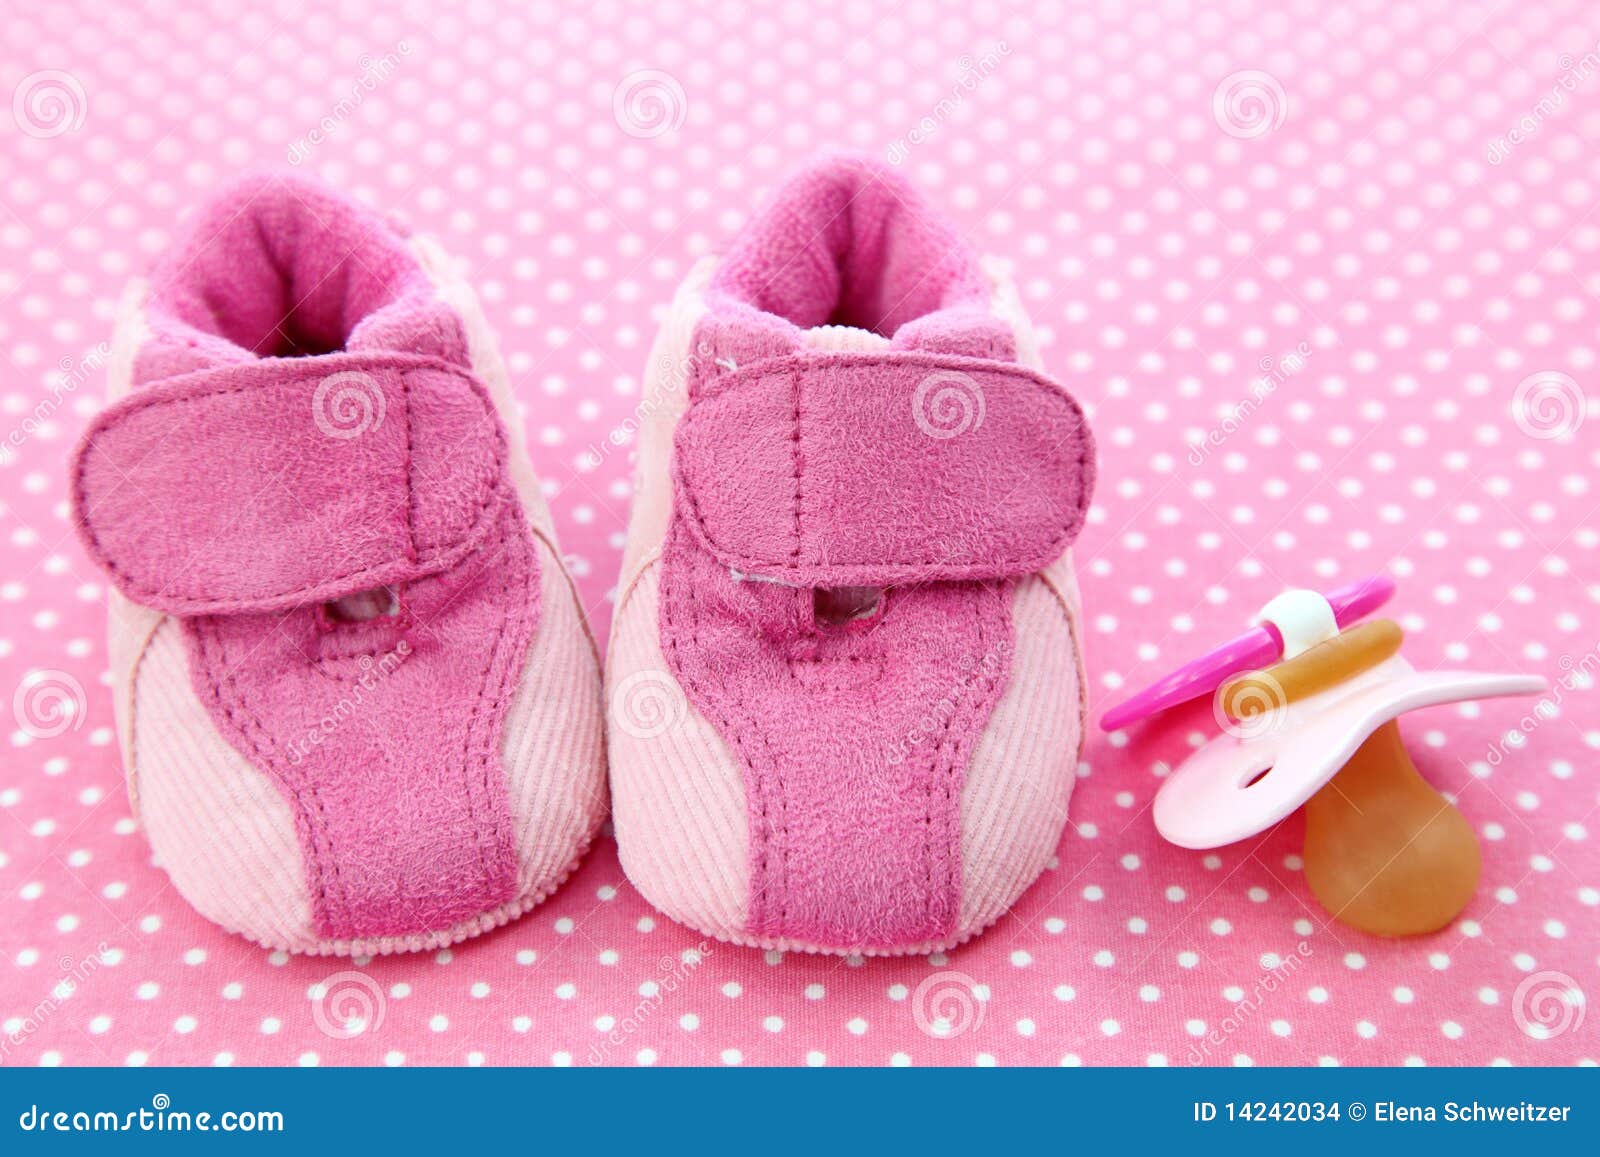 Pink baby shoes and dummy stock photo. Image of congratulation - 14242034